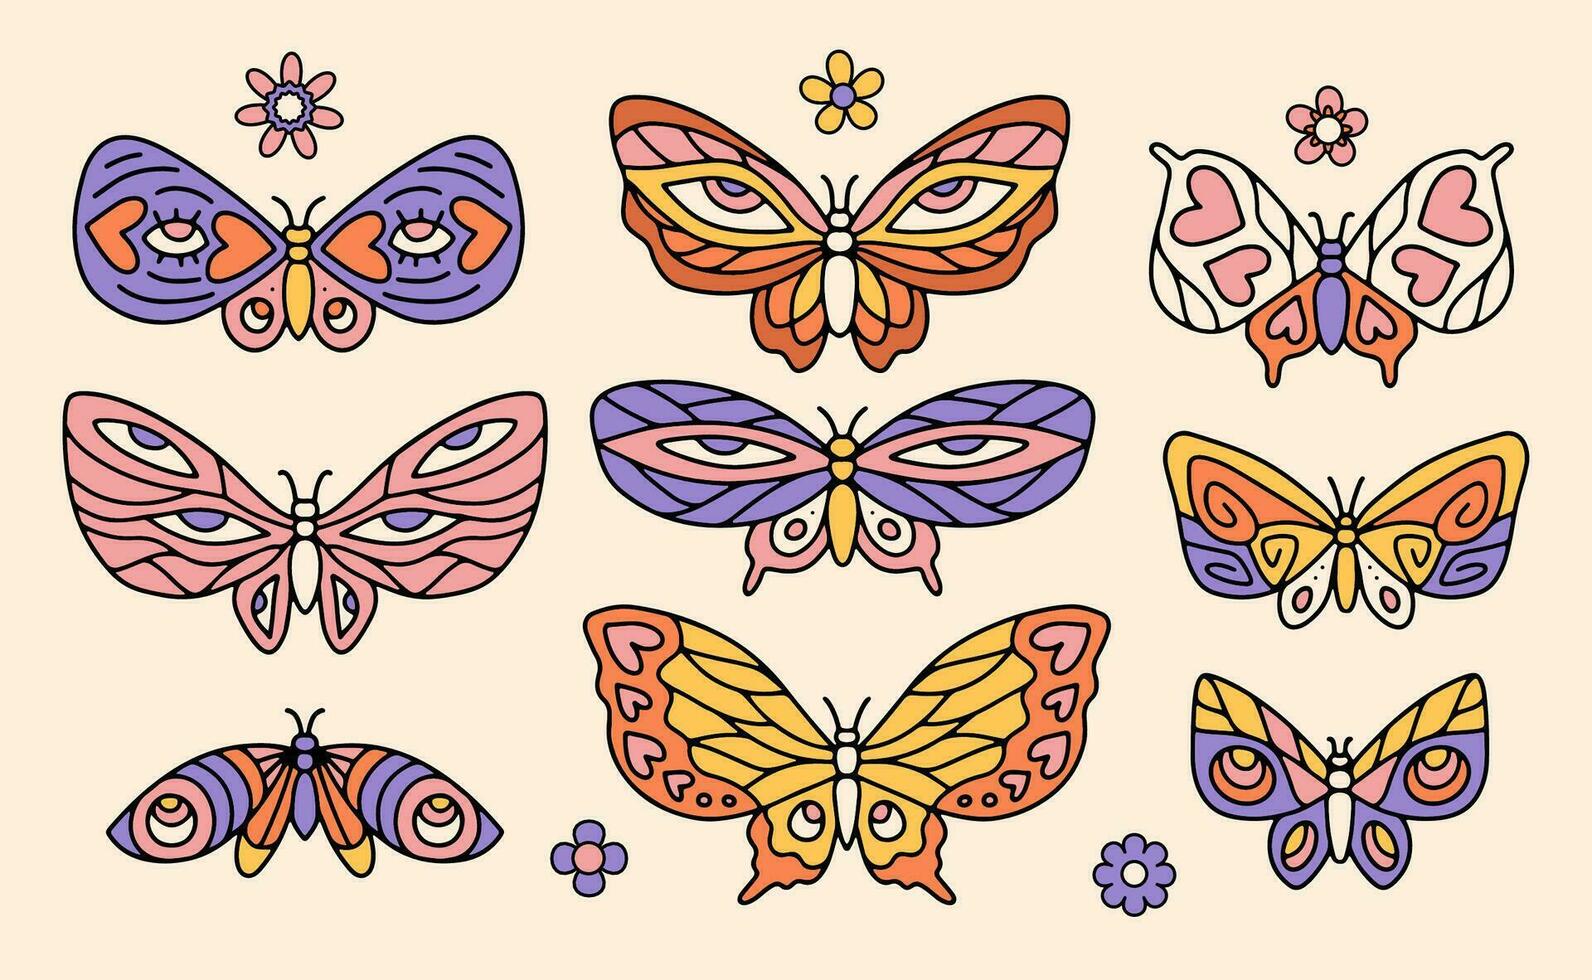 Groovy butterfly, daisy flower set. Hippie 60s 70s contour elements. Floral romantic stickers in trendy psychedelic retro style Linear hand drawn vector illustration.